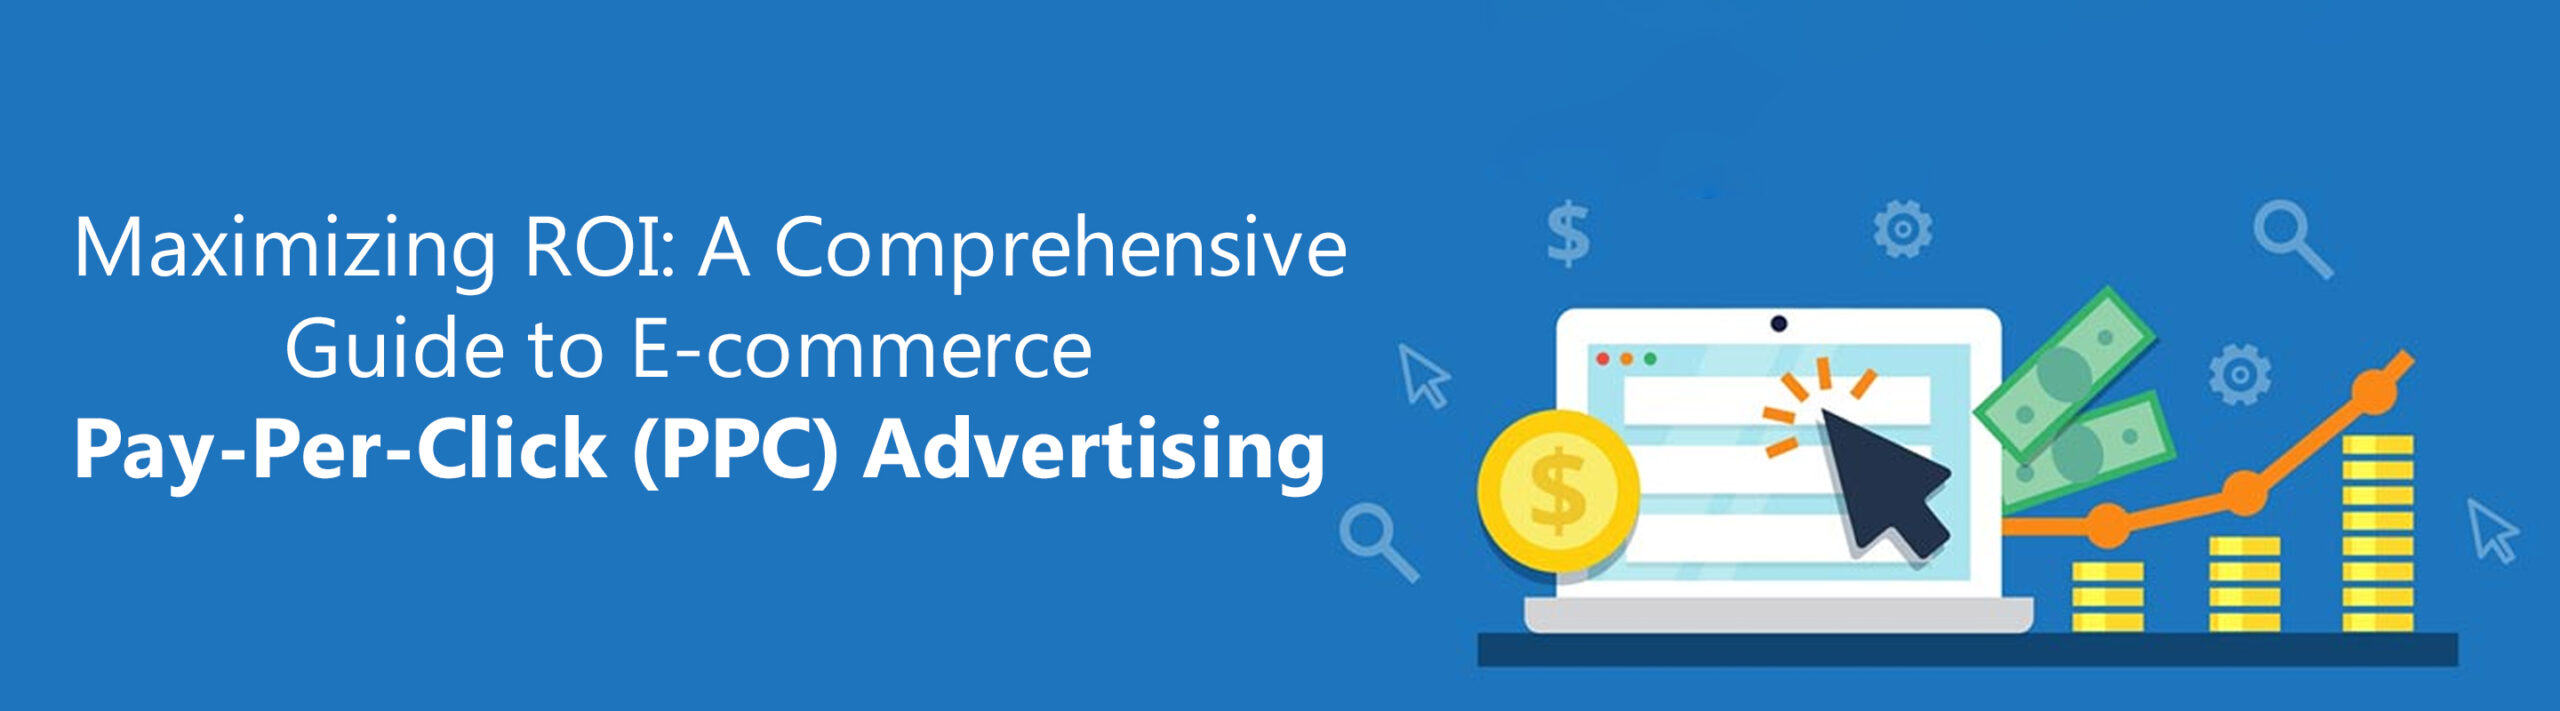 MAXIMIZING ROI: A COMPREHENSIVE GUIDE TO ECOMMERCE PAY-PER-CLICK (PPC) ADVERTISING